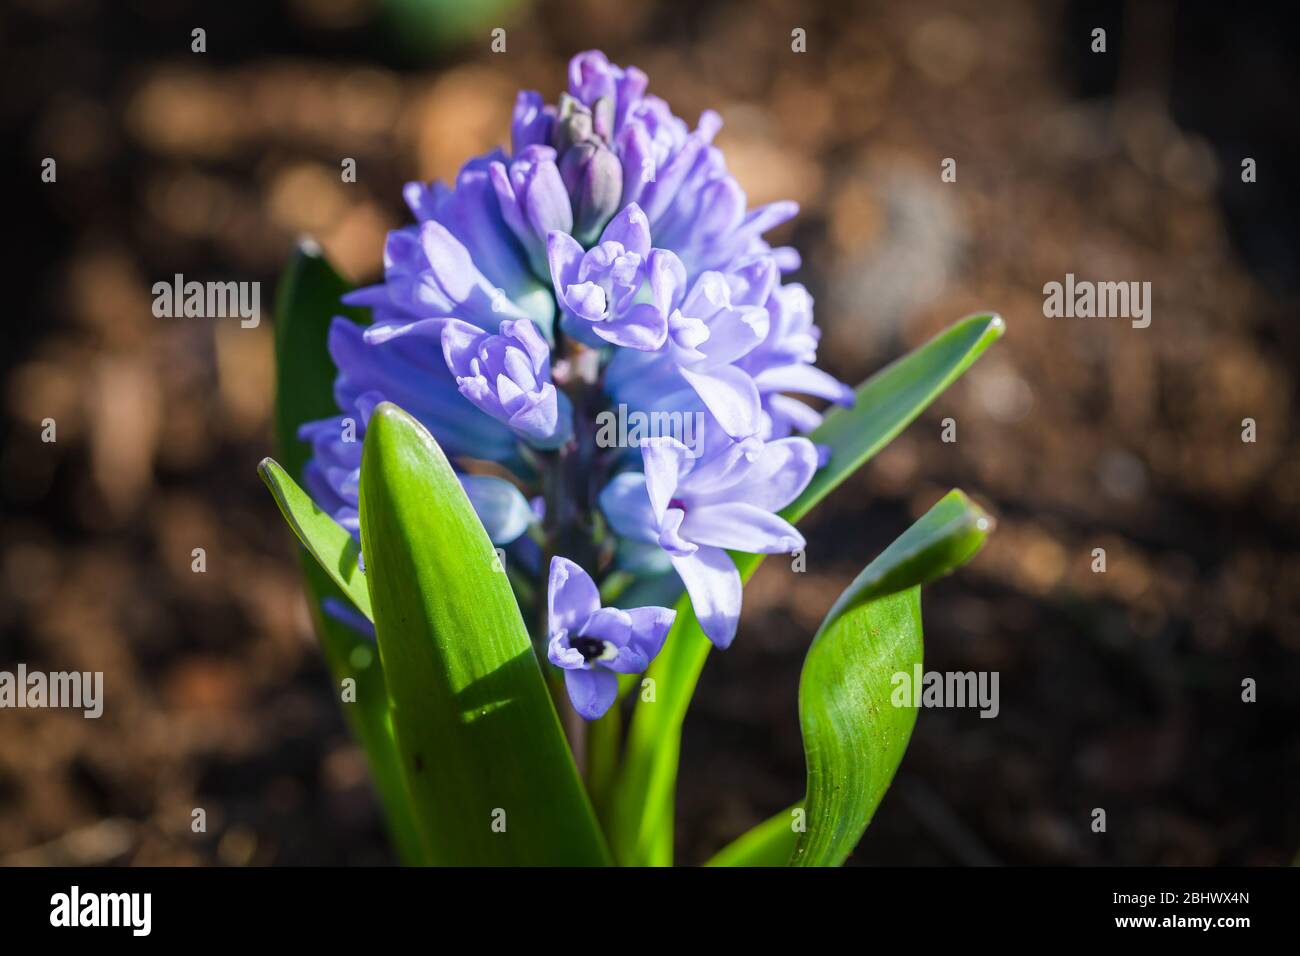 Hyacinths flowers in spring garden. Hyacinthus is a small genus of bulbous, fragrant flowering plants in the family Asparagaceae, subfamily Scilloidea Stock Photo